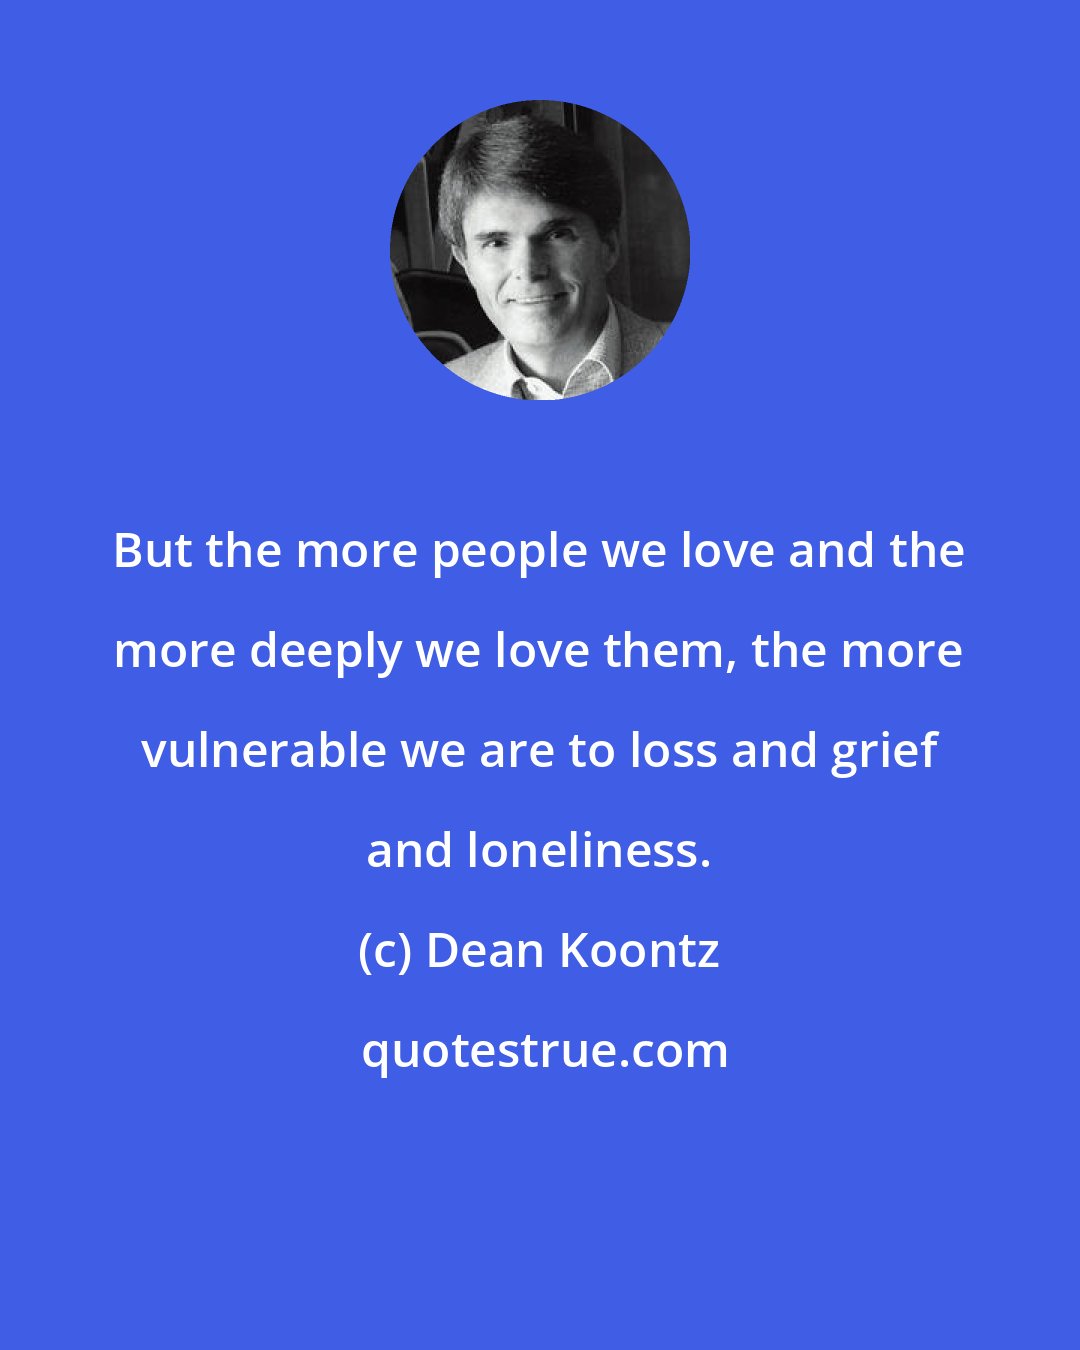 Dean Koontz: But the more people we love and the more deeply we love them, the more vulnerable we are to loss and grief and loneliness.